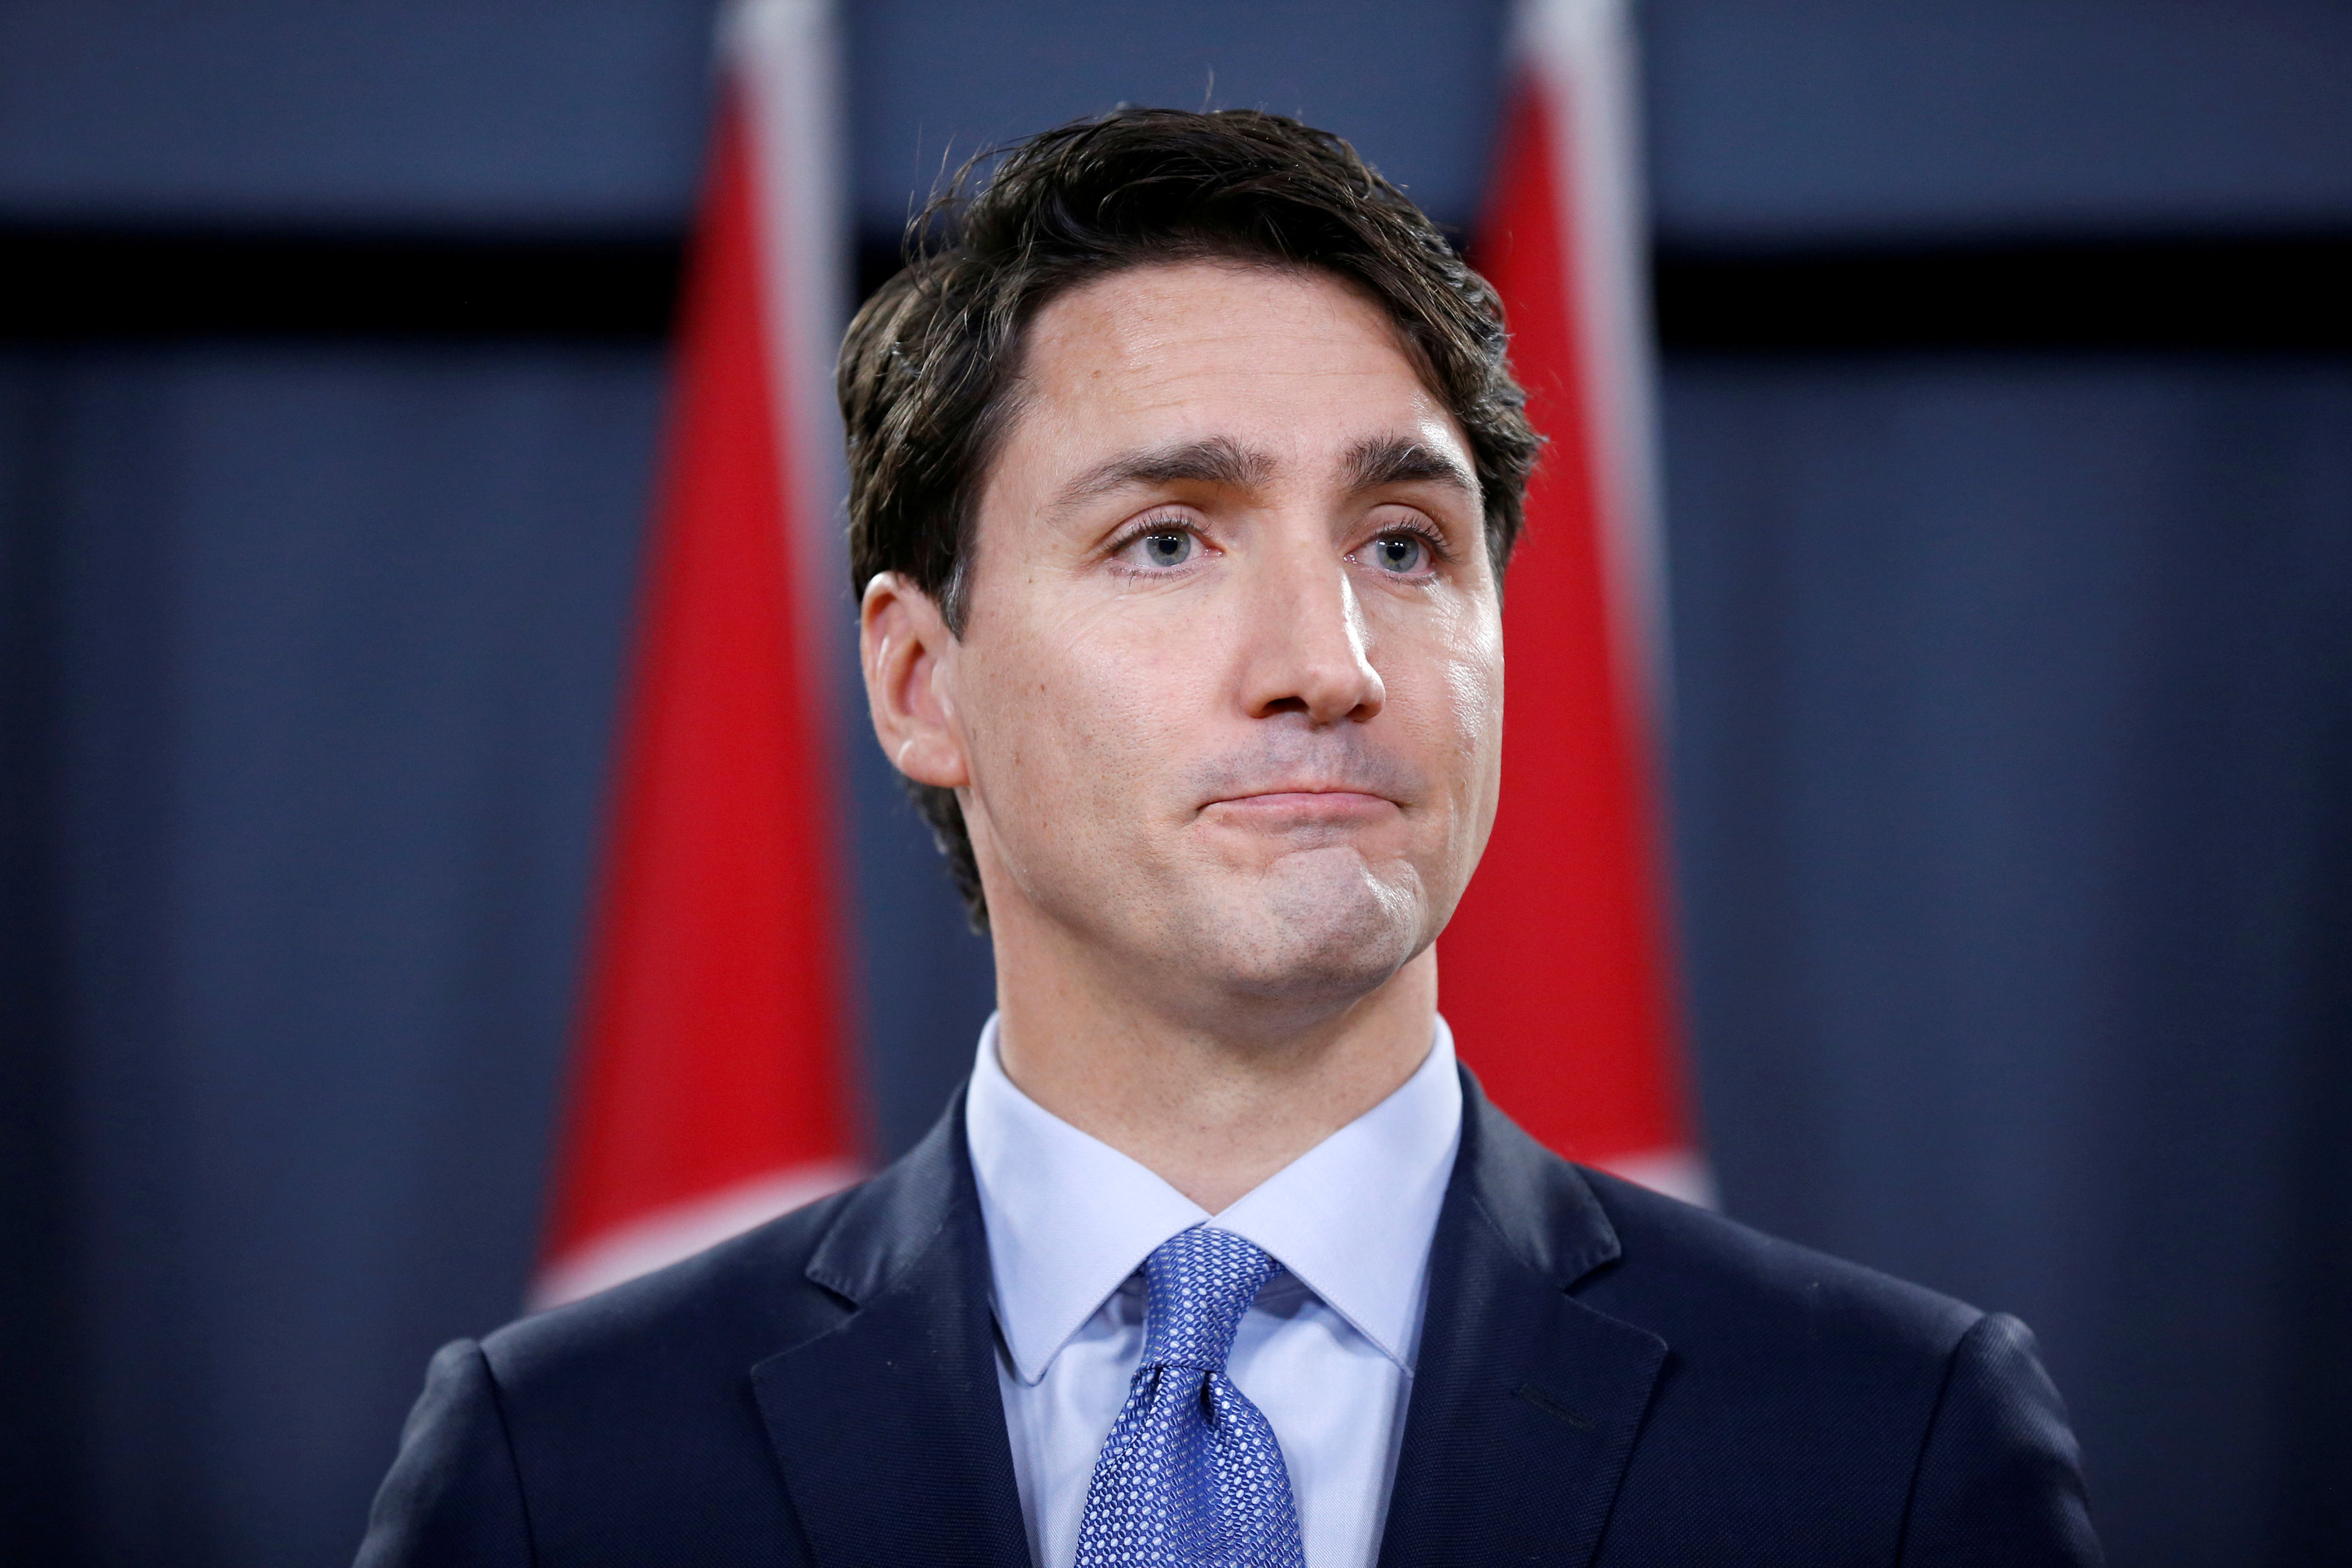 Canada's Prime Minister Justin Trudeau takes part in a news conference in Ottawa, Ontario, Canada, December 12, 2016. REUTERS/Chris Wattie/File Photo